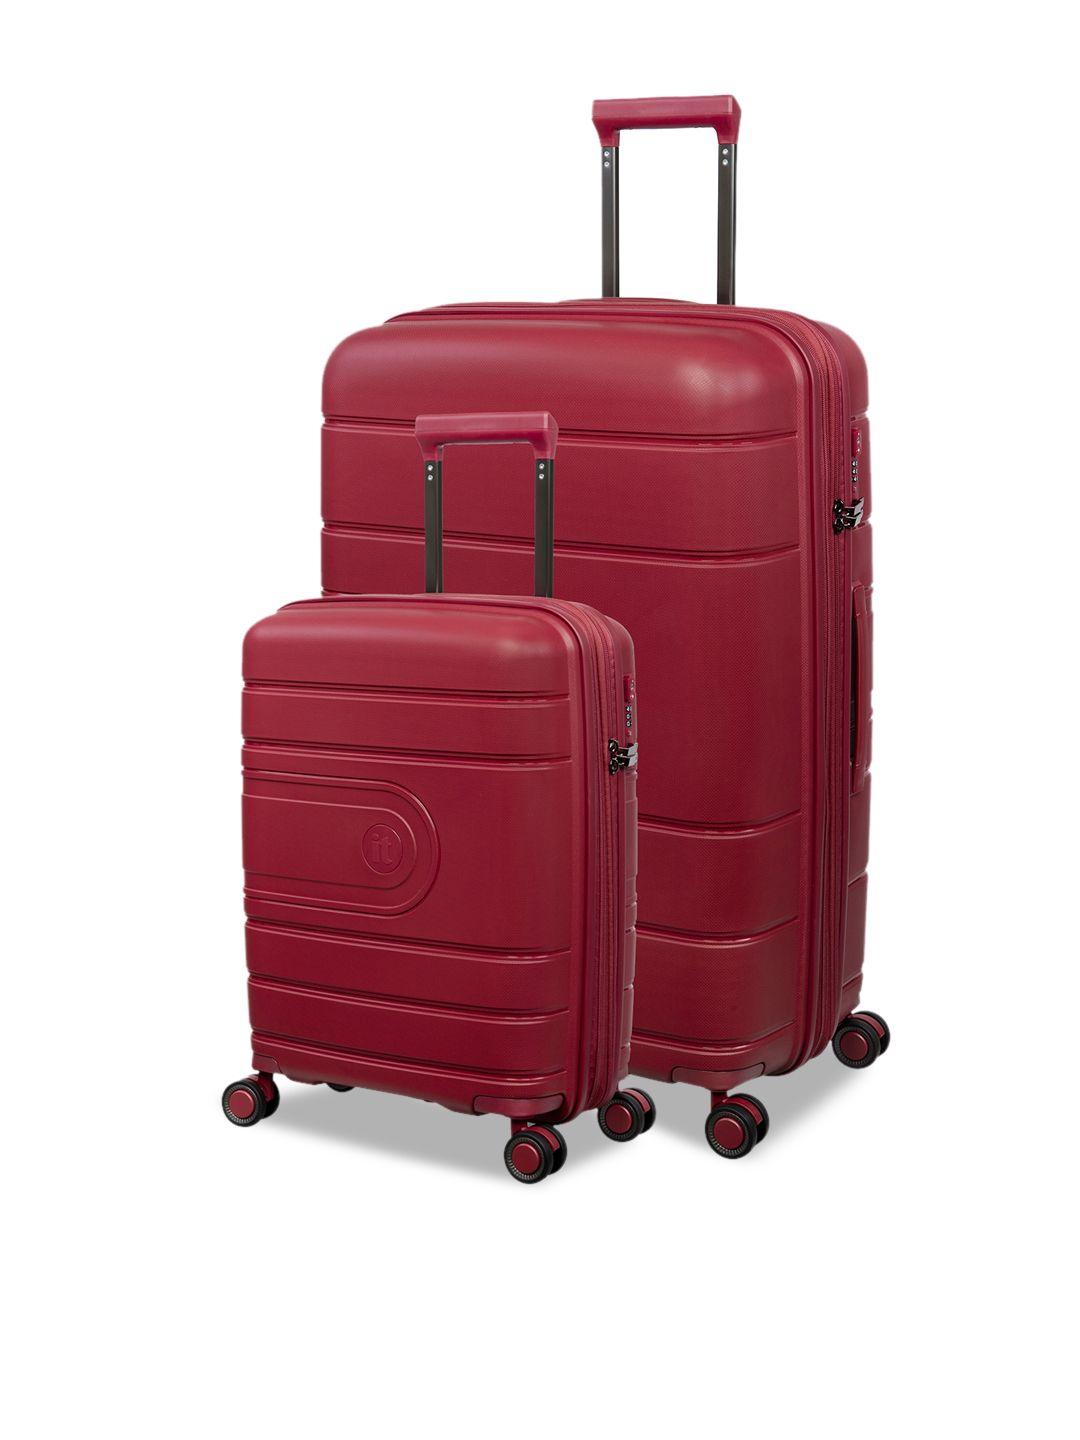 it luggage set of 2 red patterned 360-degree rotation hard-sided trolley bag